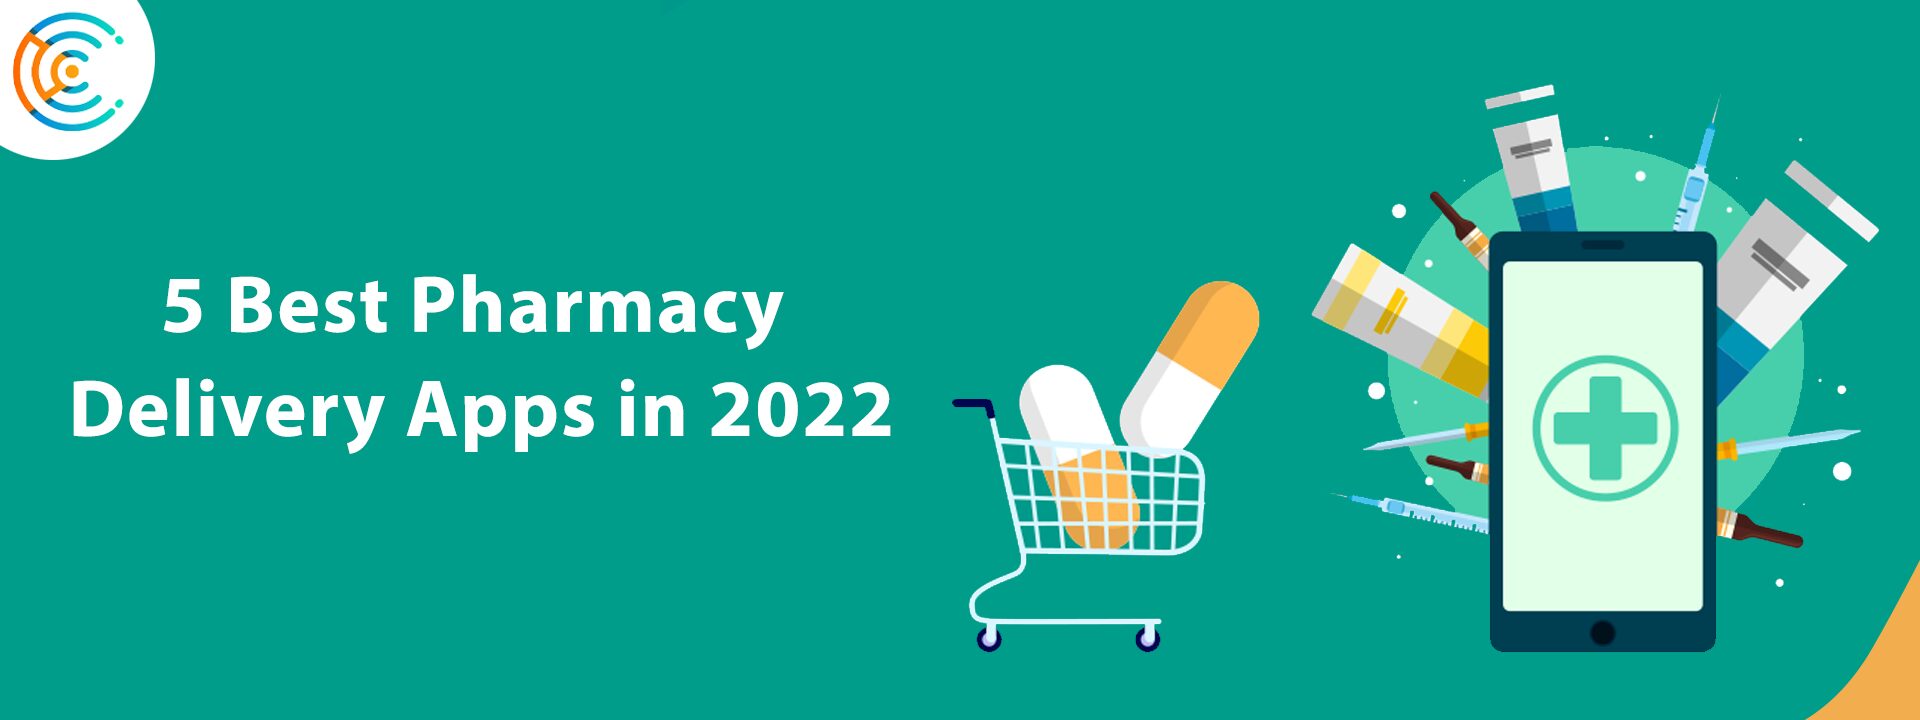 5 Best Pharmacy Delivery Apps in 2022